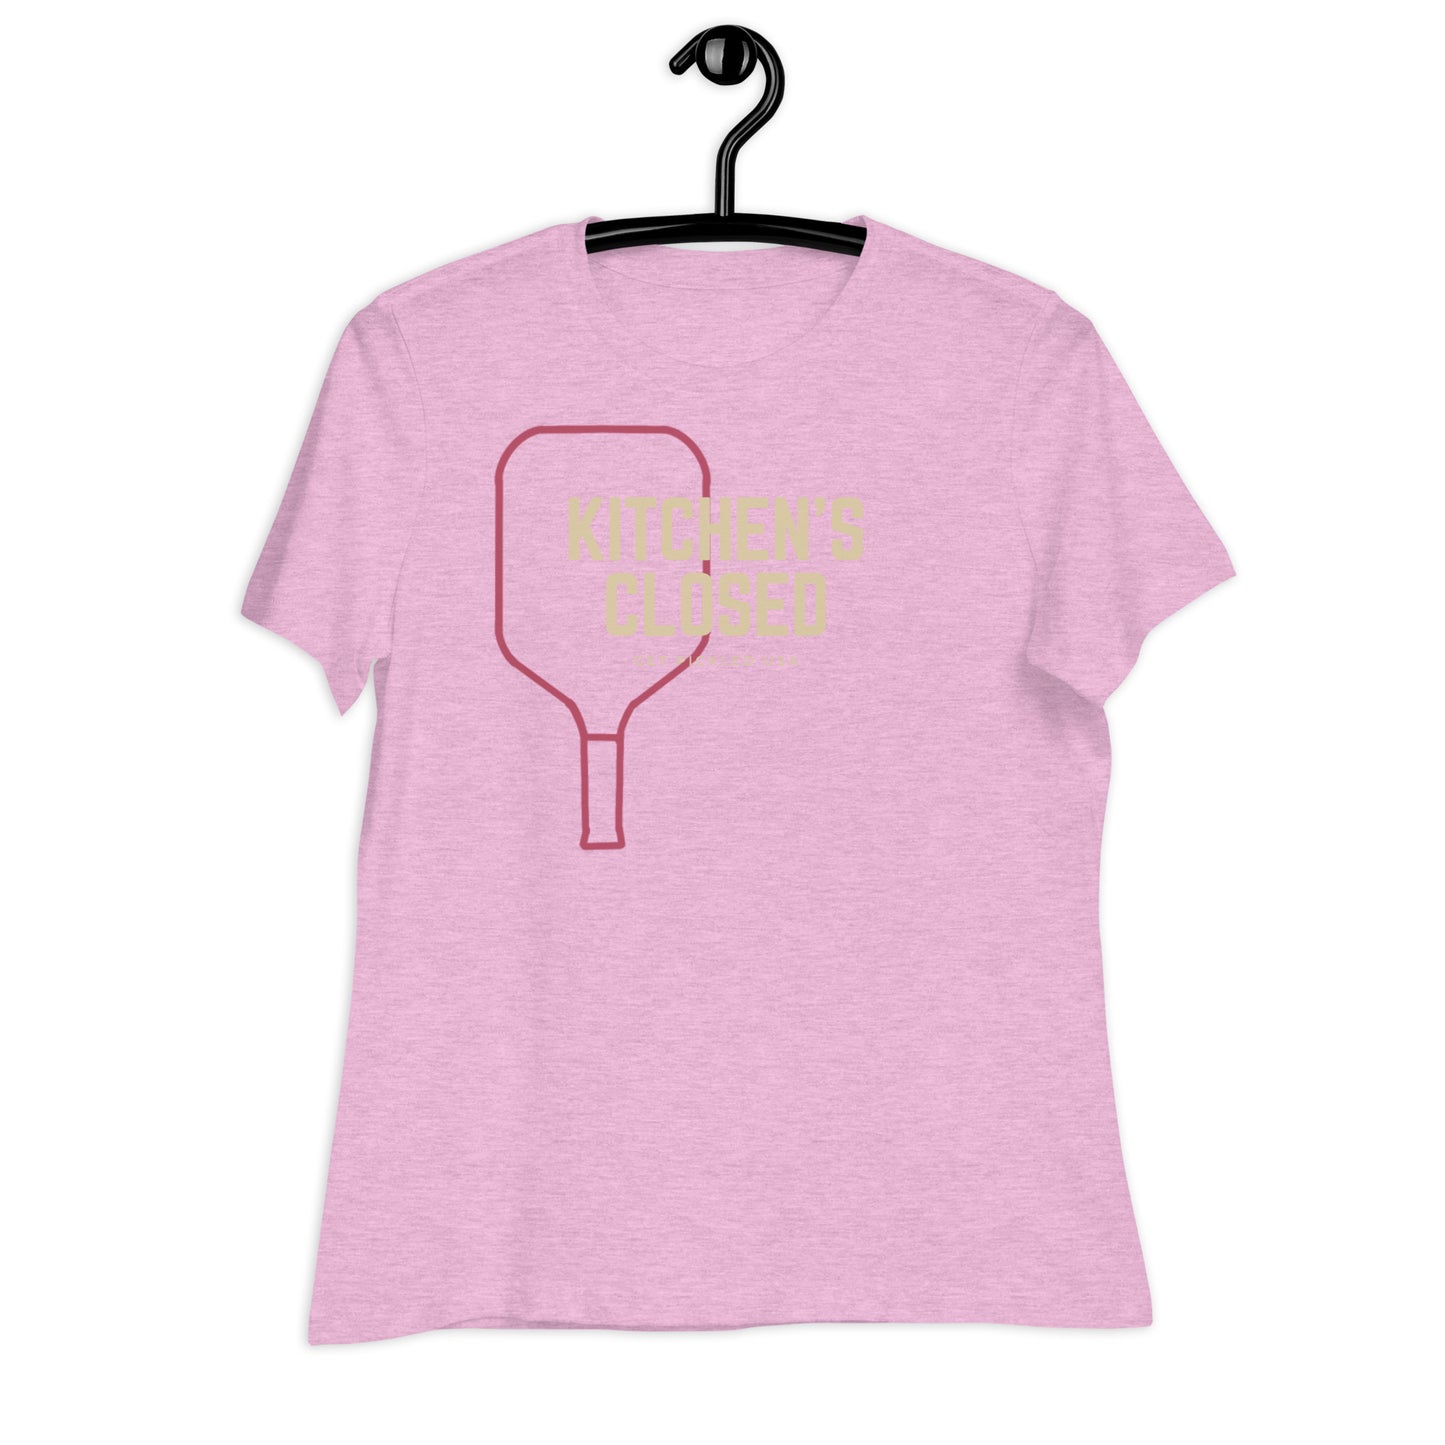 Kitchen’s Closed Women's Relaxed T-Shirt